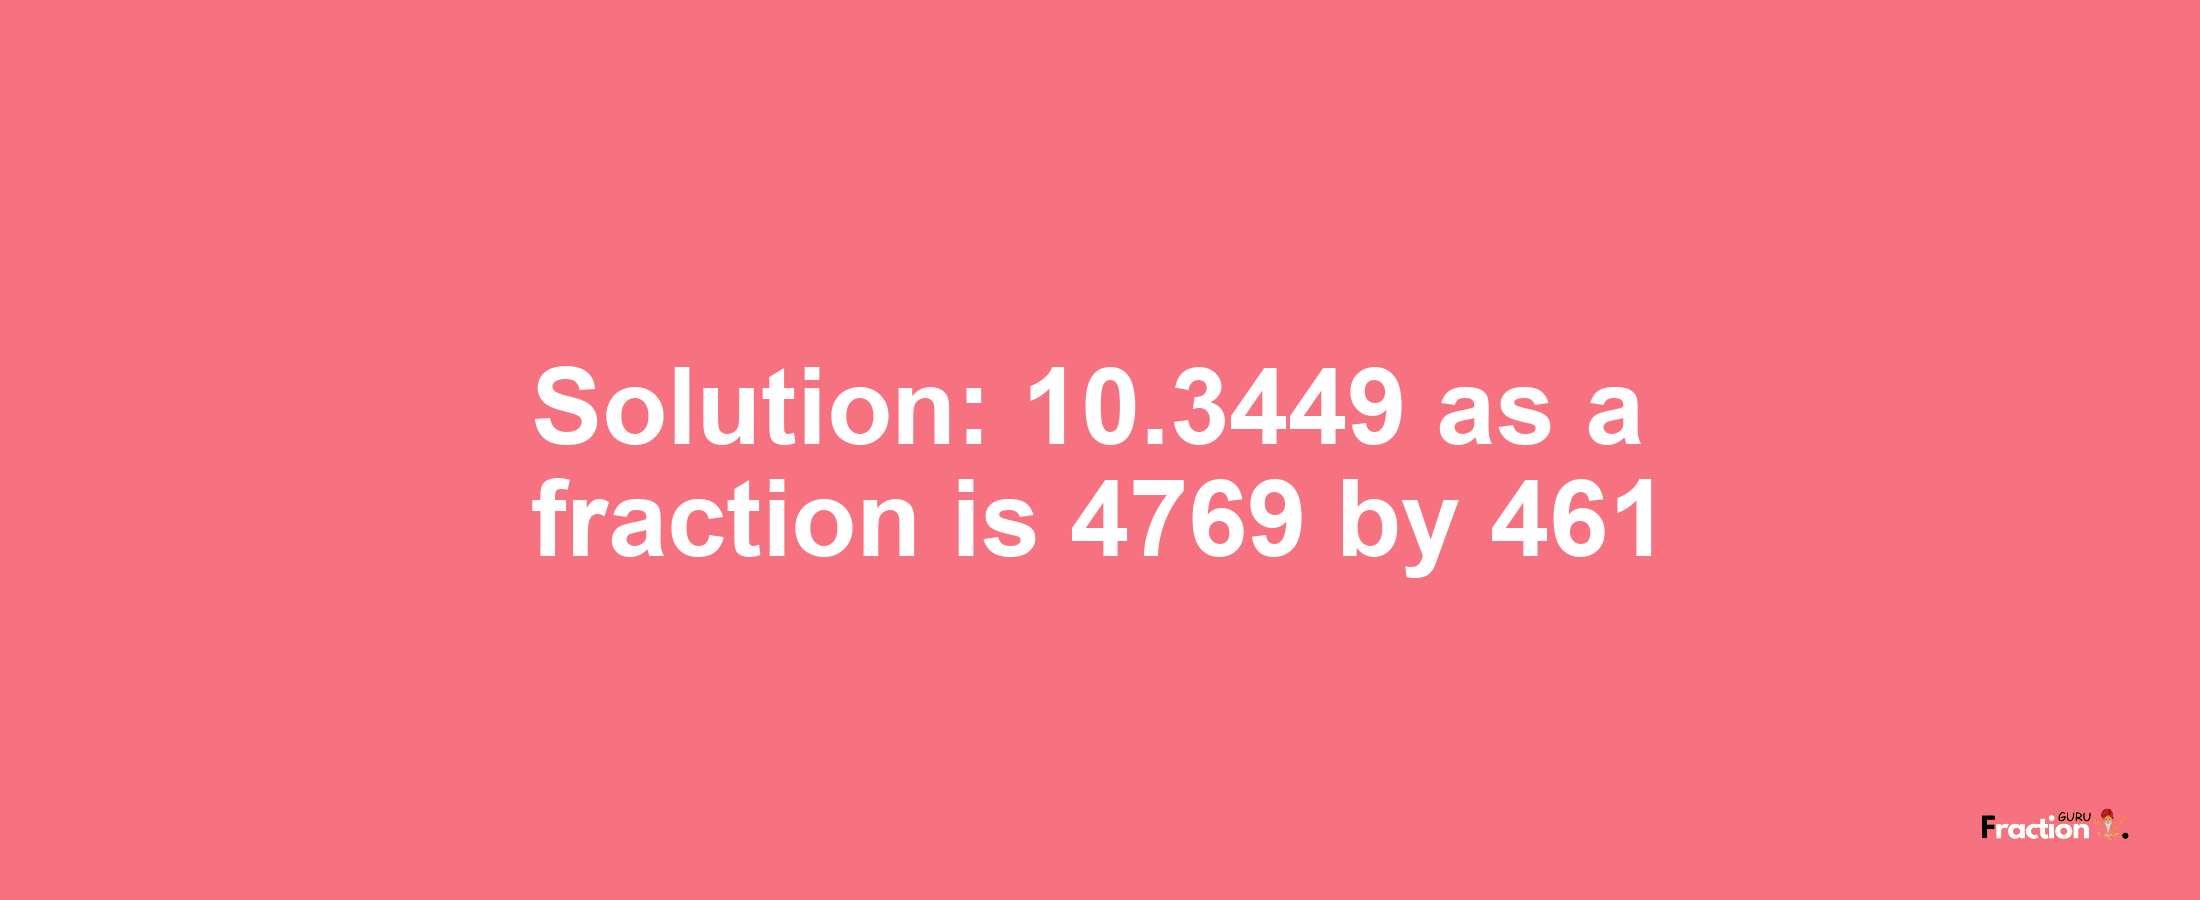 Solution:10.3449 as a fraction is 4769/461